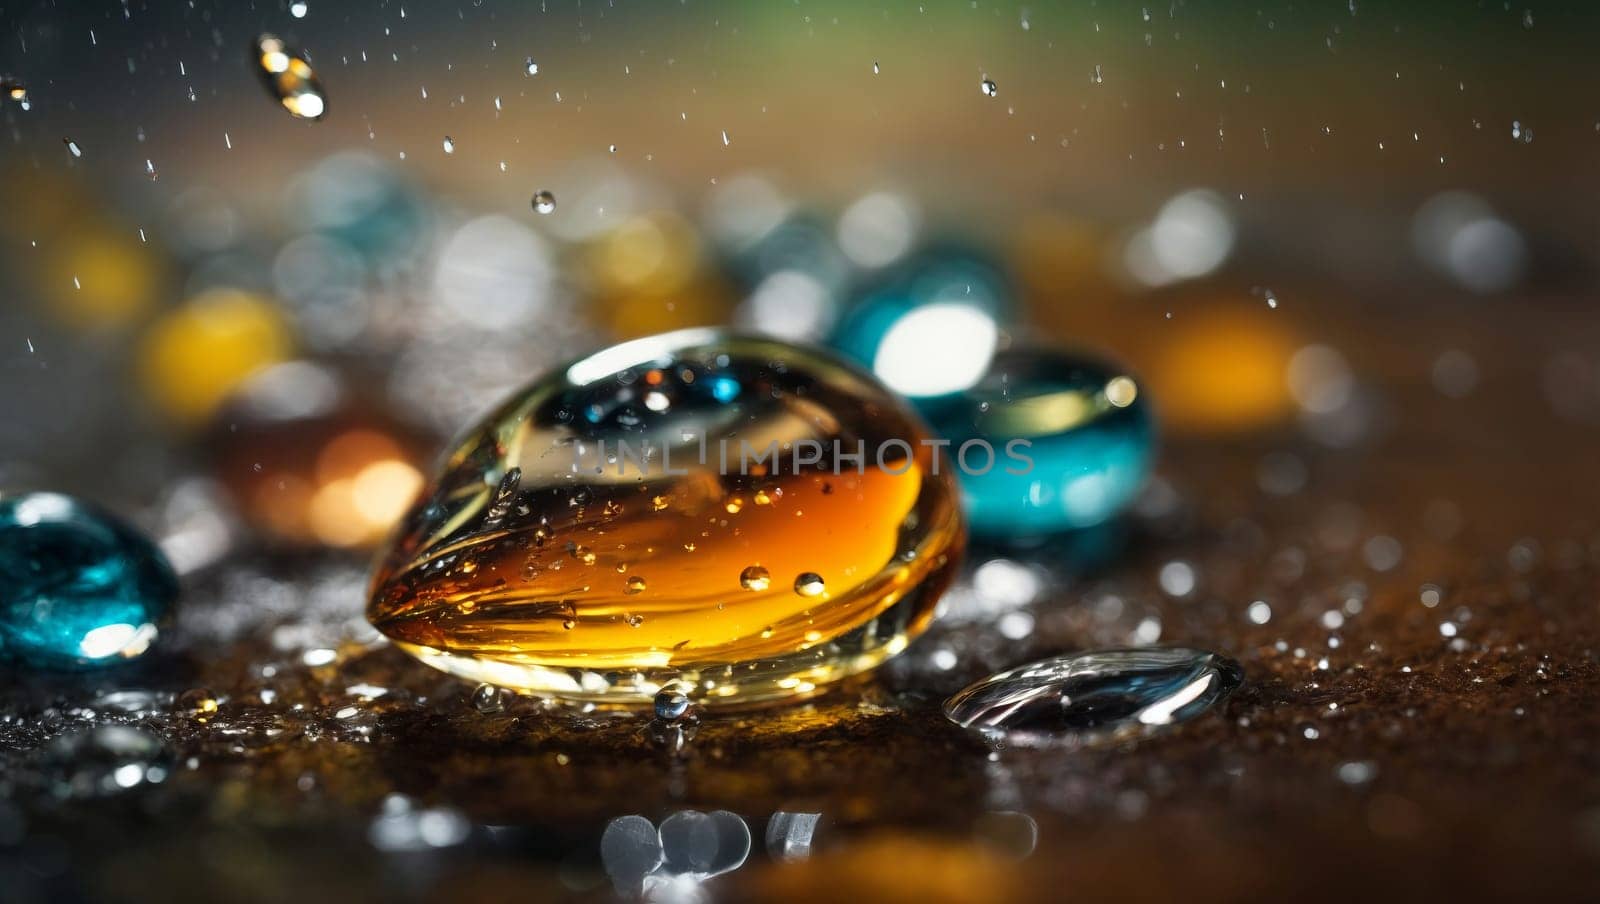 Photograph of falling raindrops by applesstock